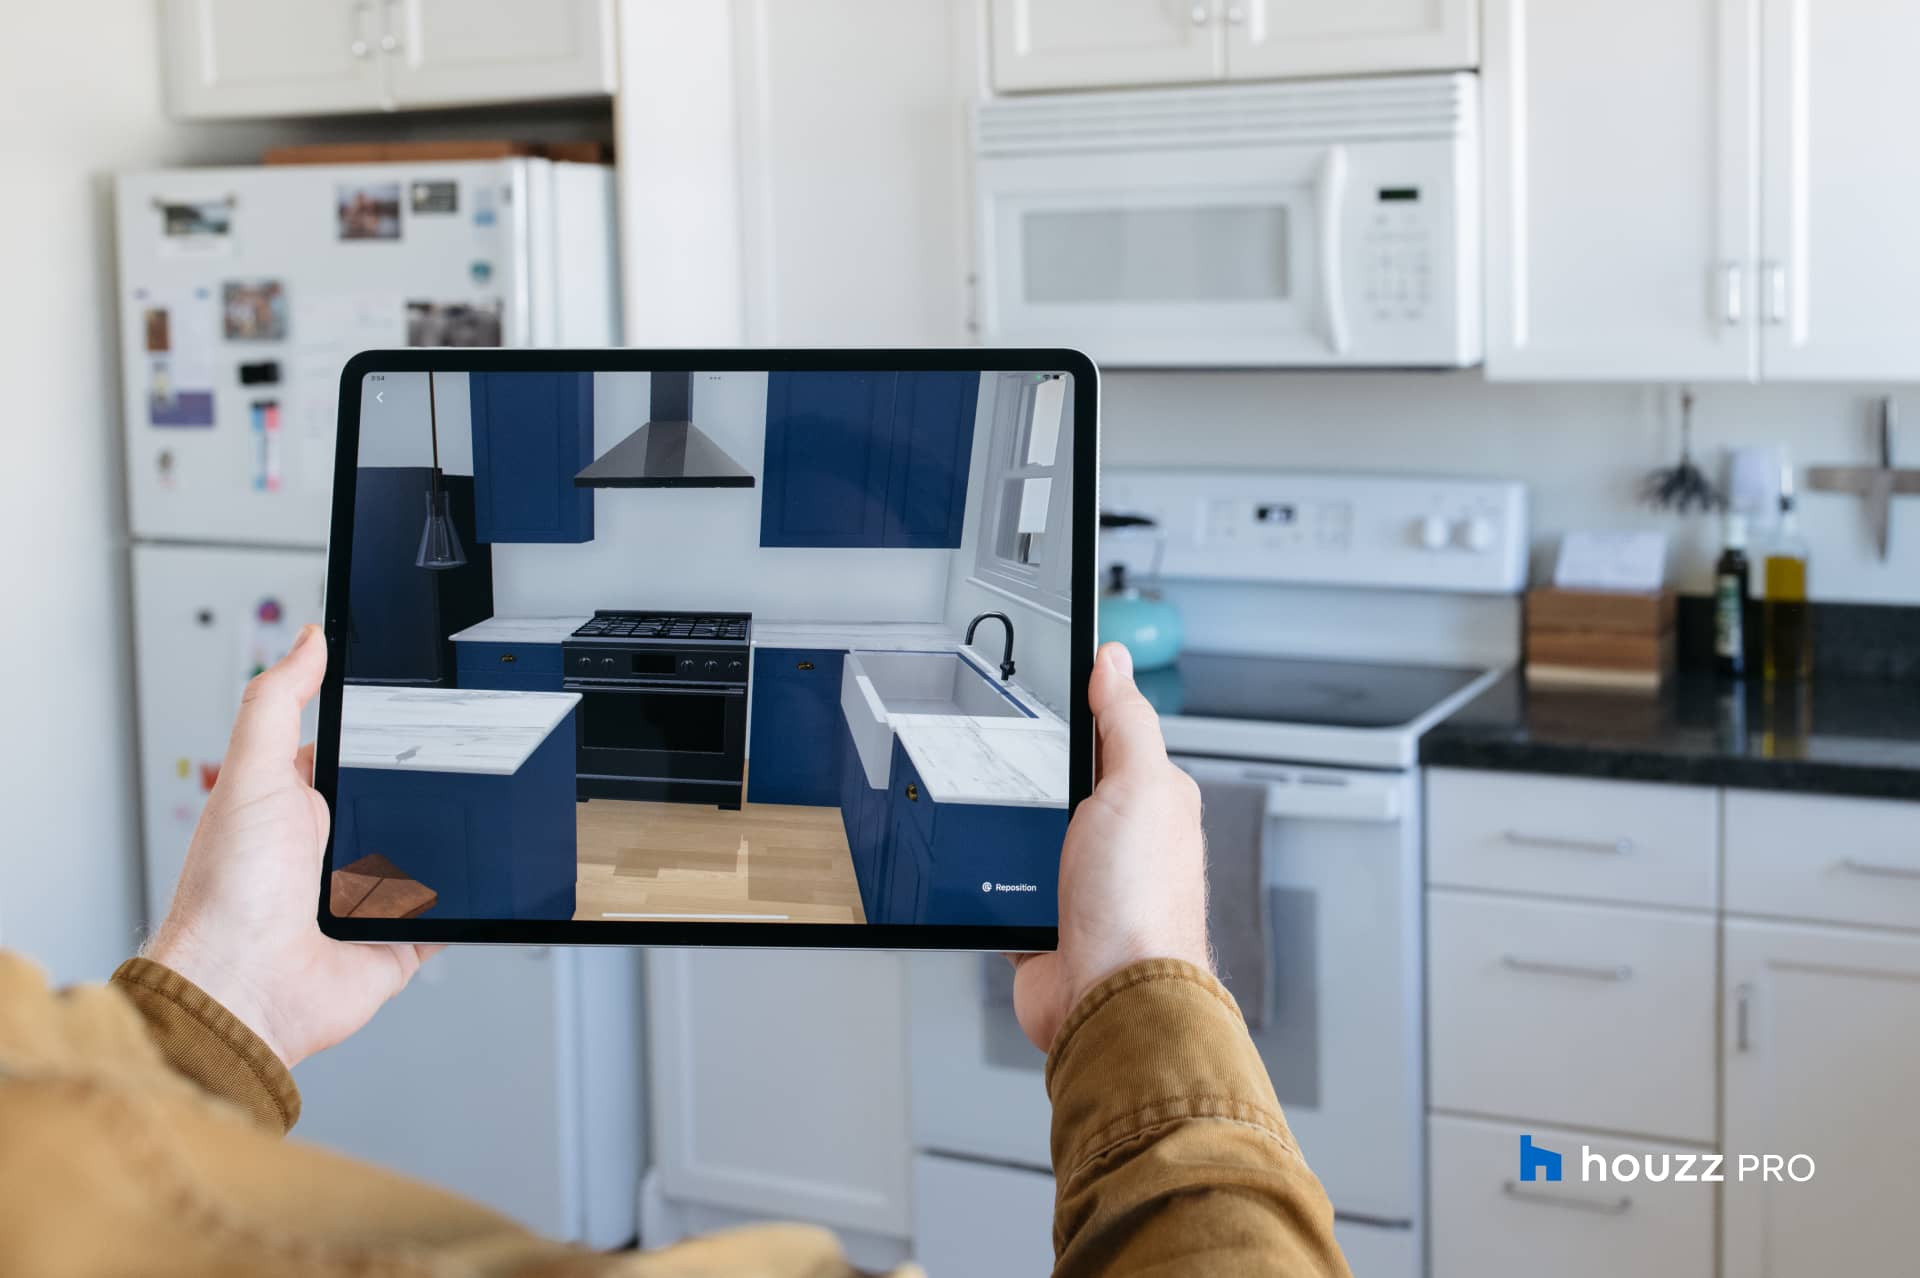 What’s Houzz’ Role in AR Shopping?